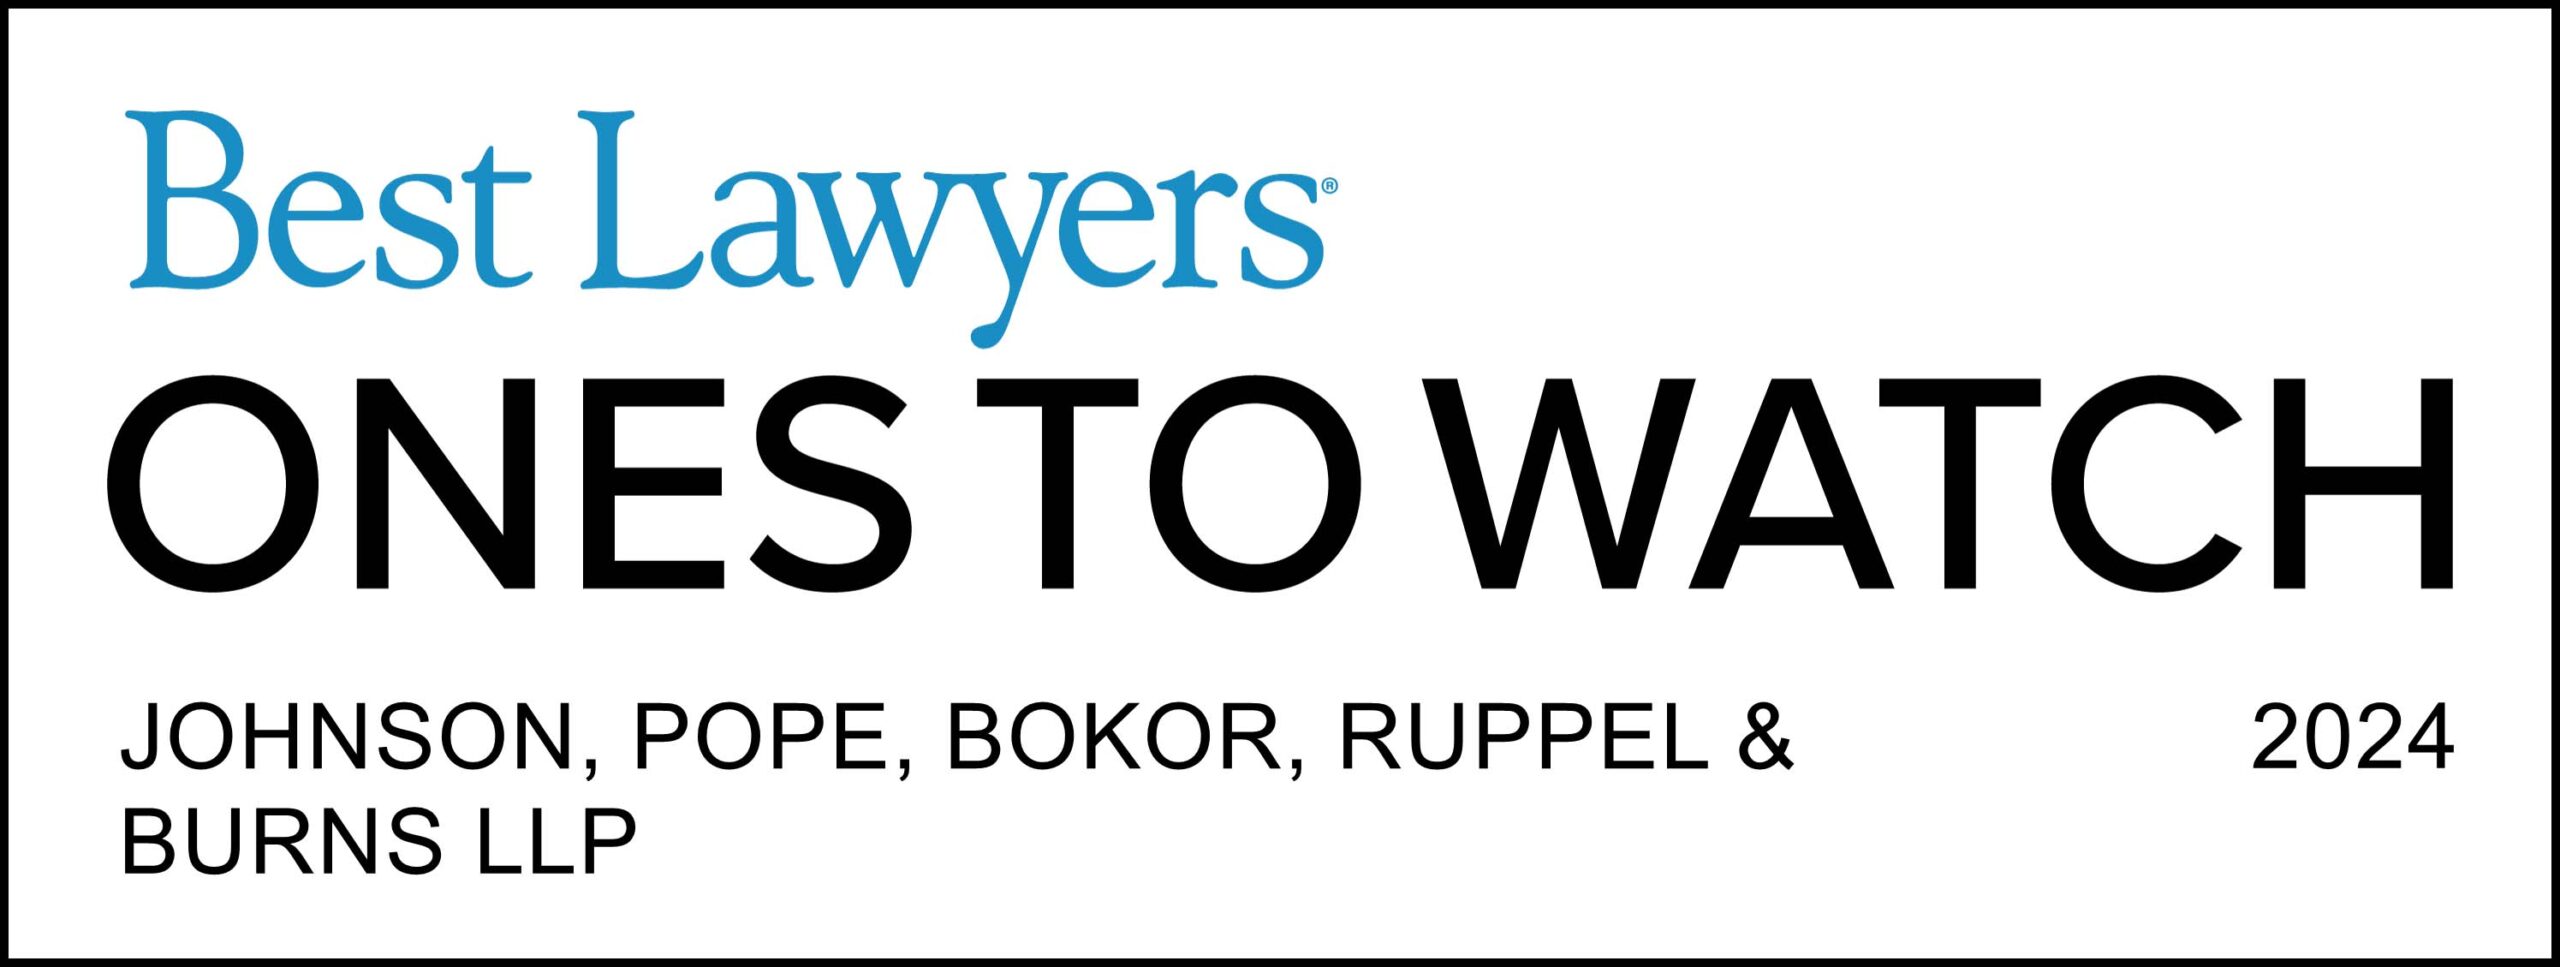 Best Lawyers Ones to Watch